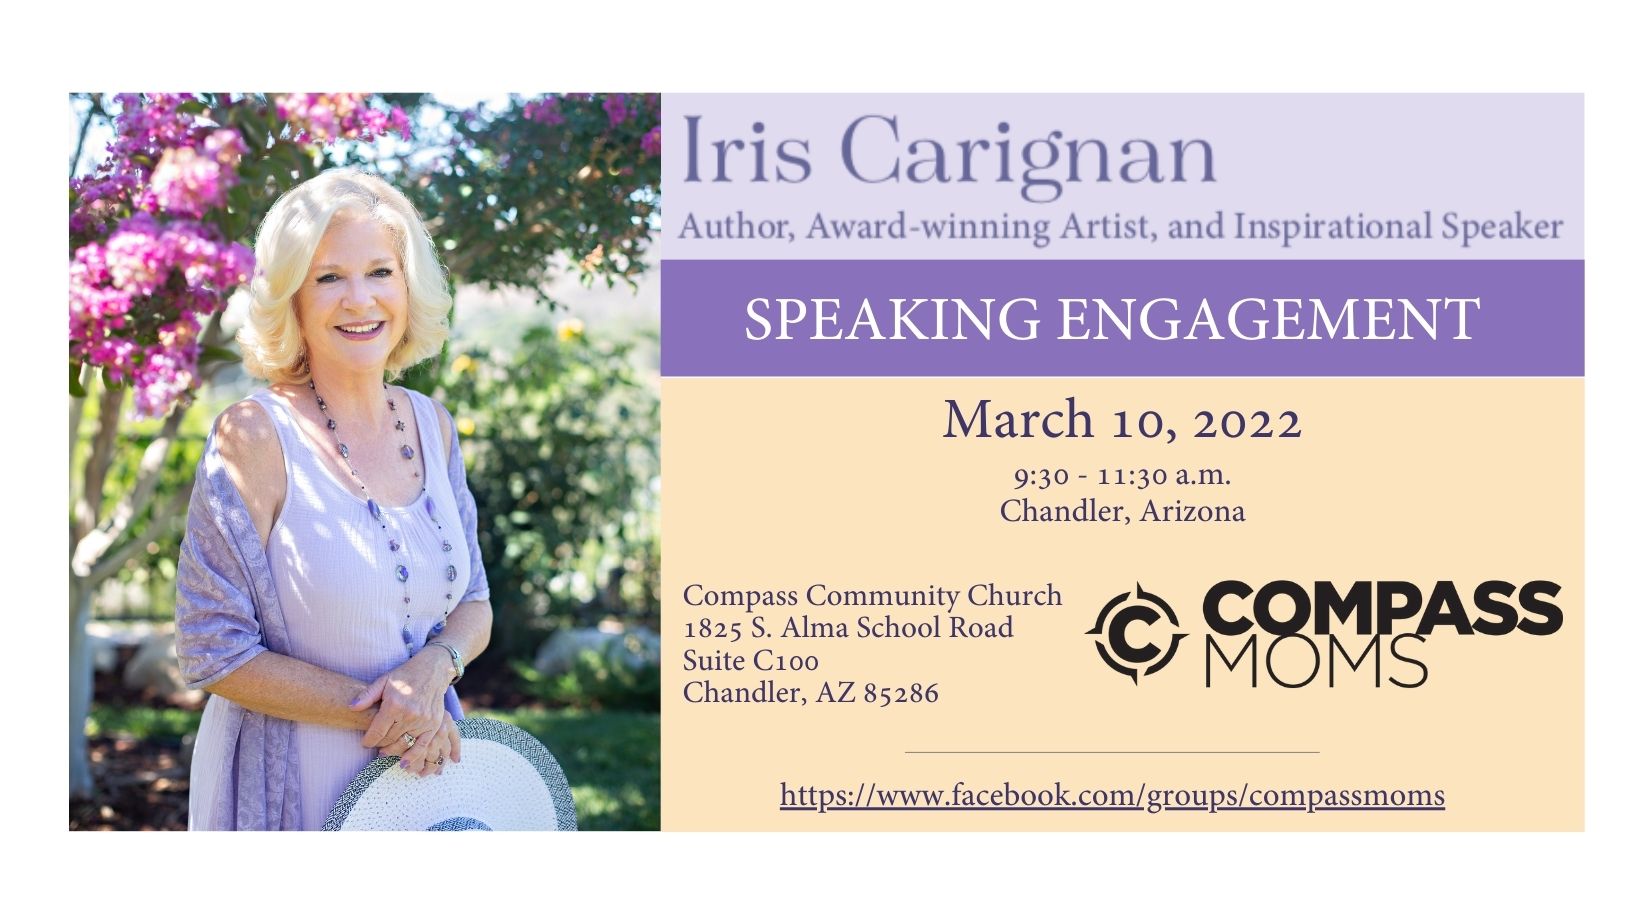 New Speaking Engagements for Iris